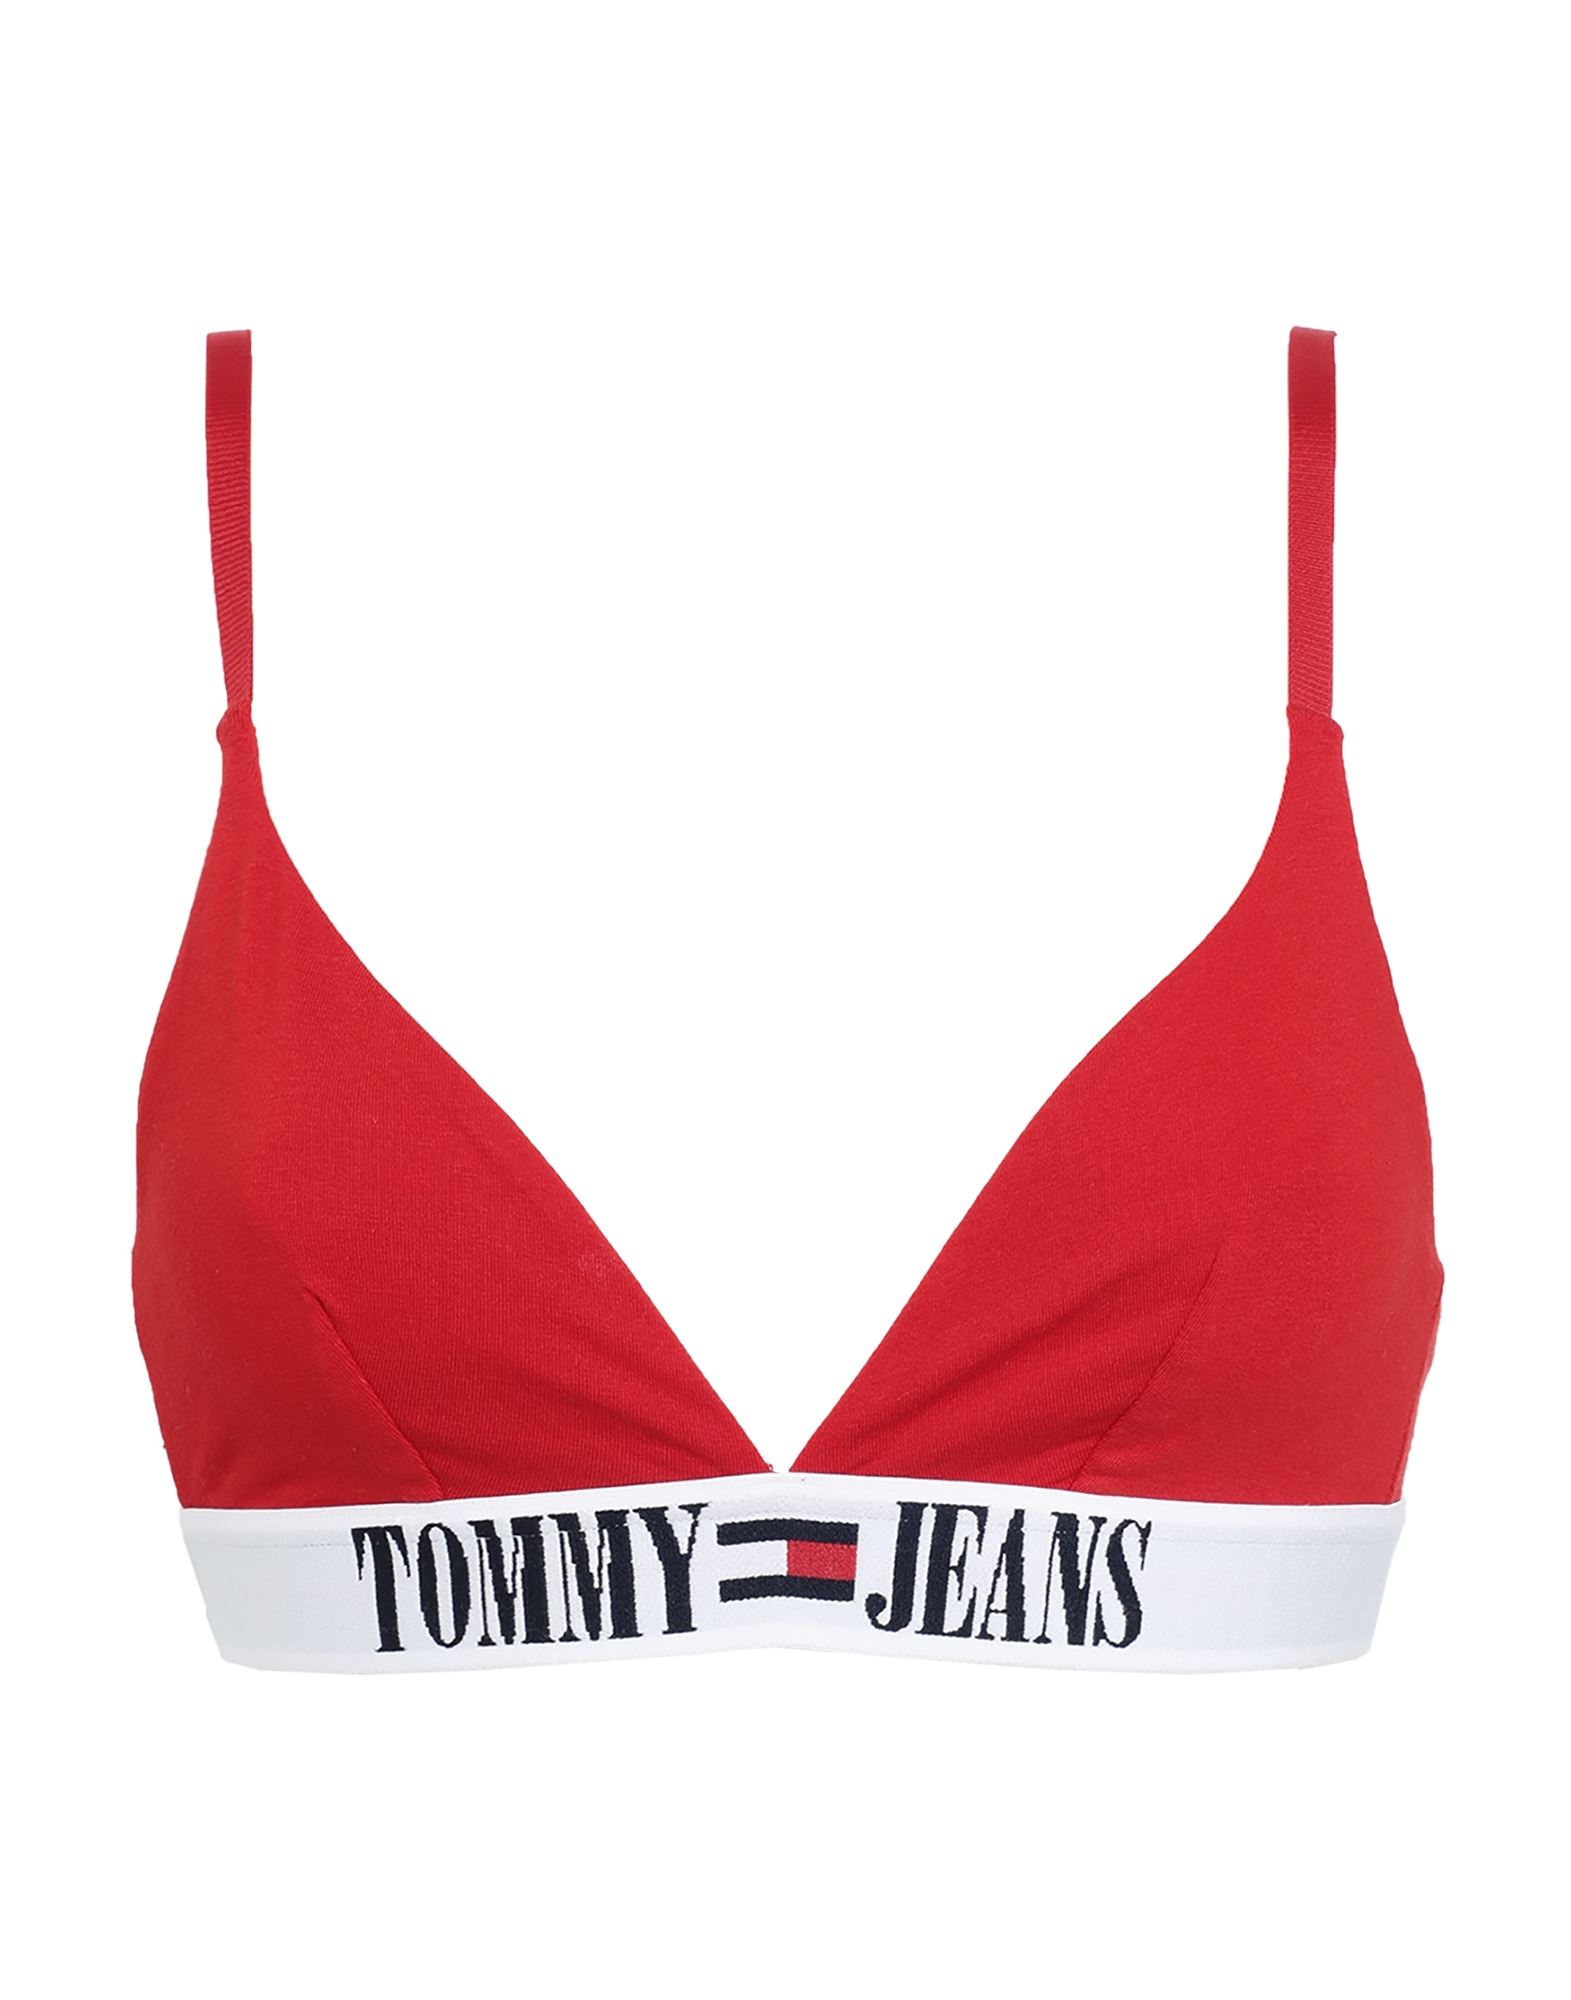 TOMMY JEANS Bh Damen Rot von TOMMY JEANS